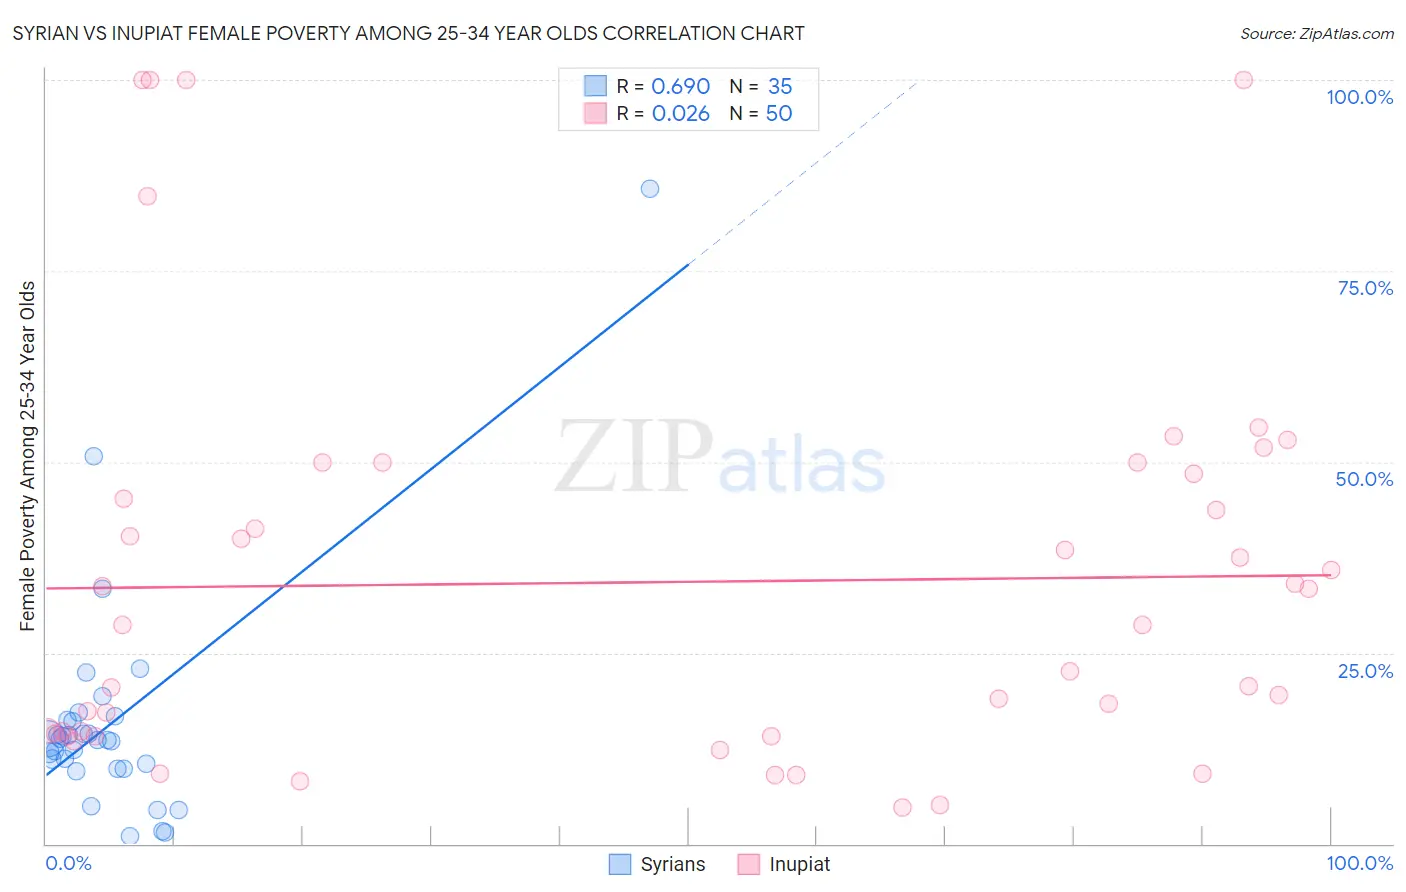 Syrian vs Inupiat Female Poverty Among 25-34 Year Olds